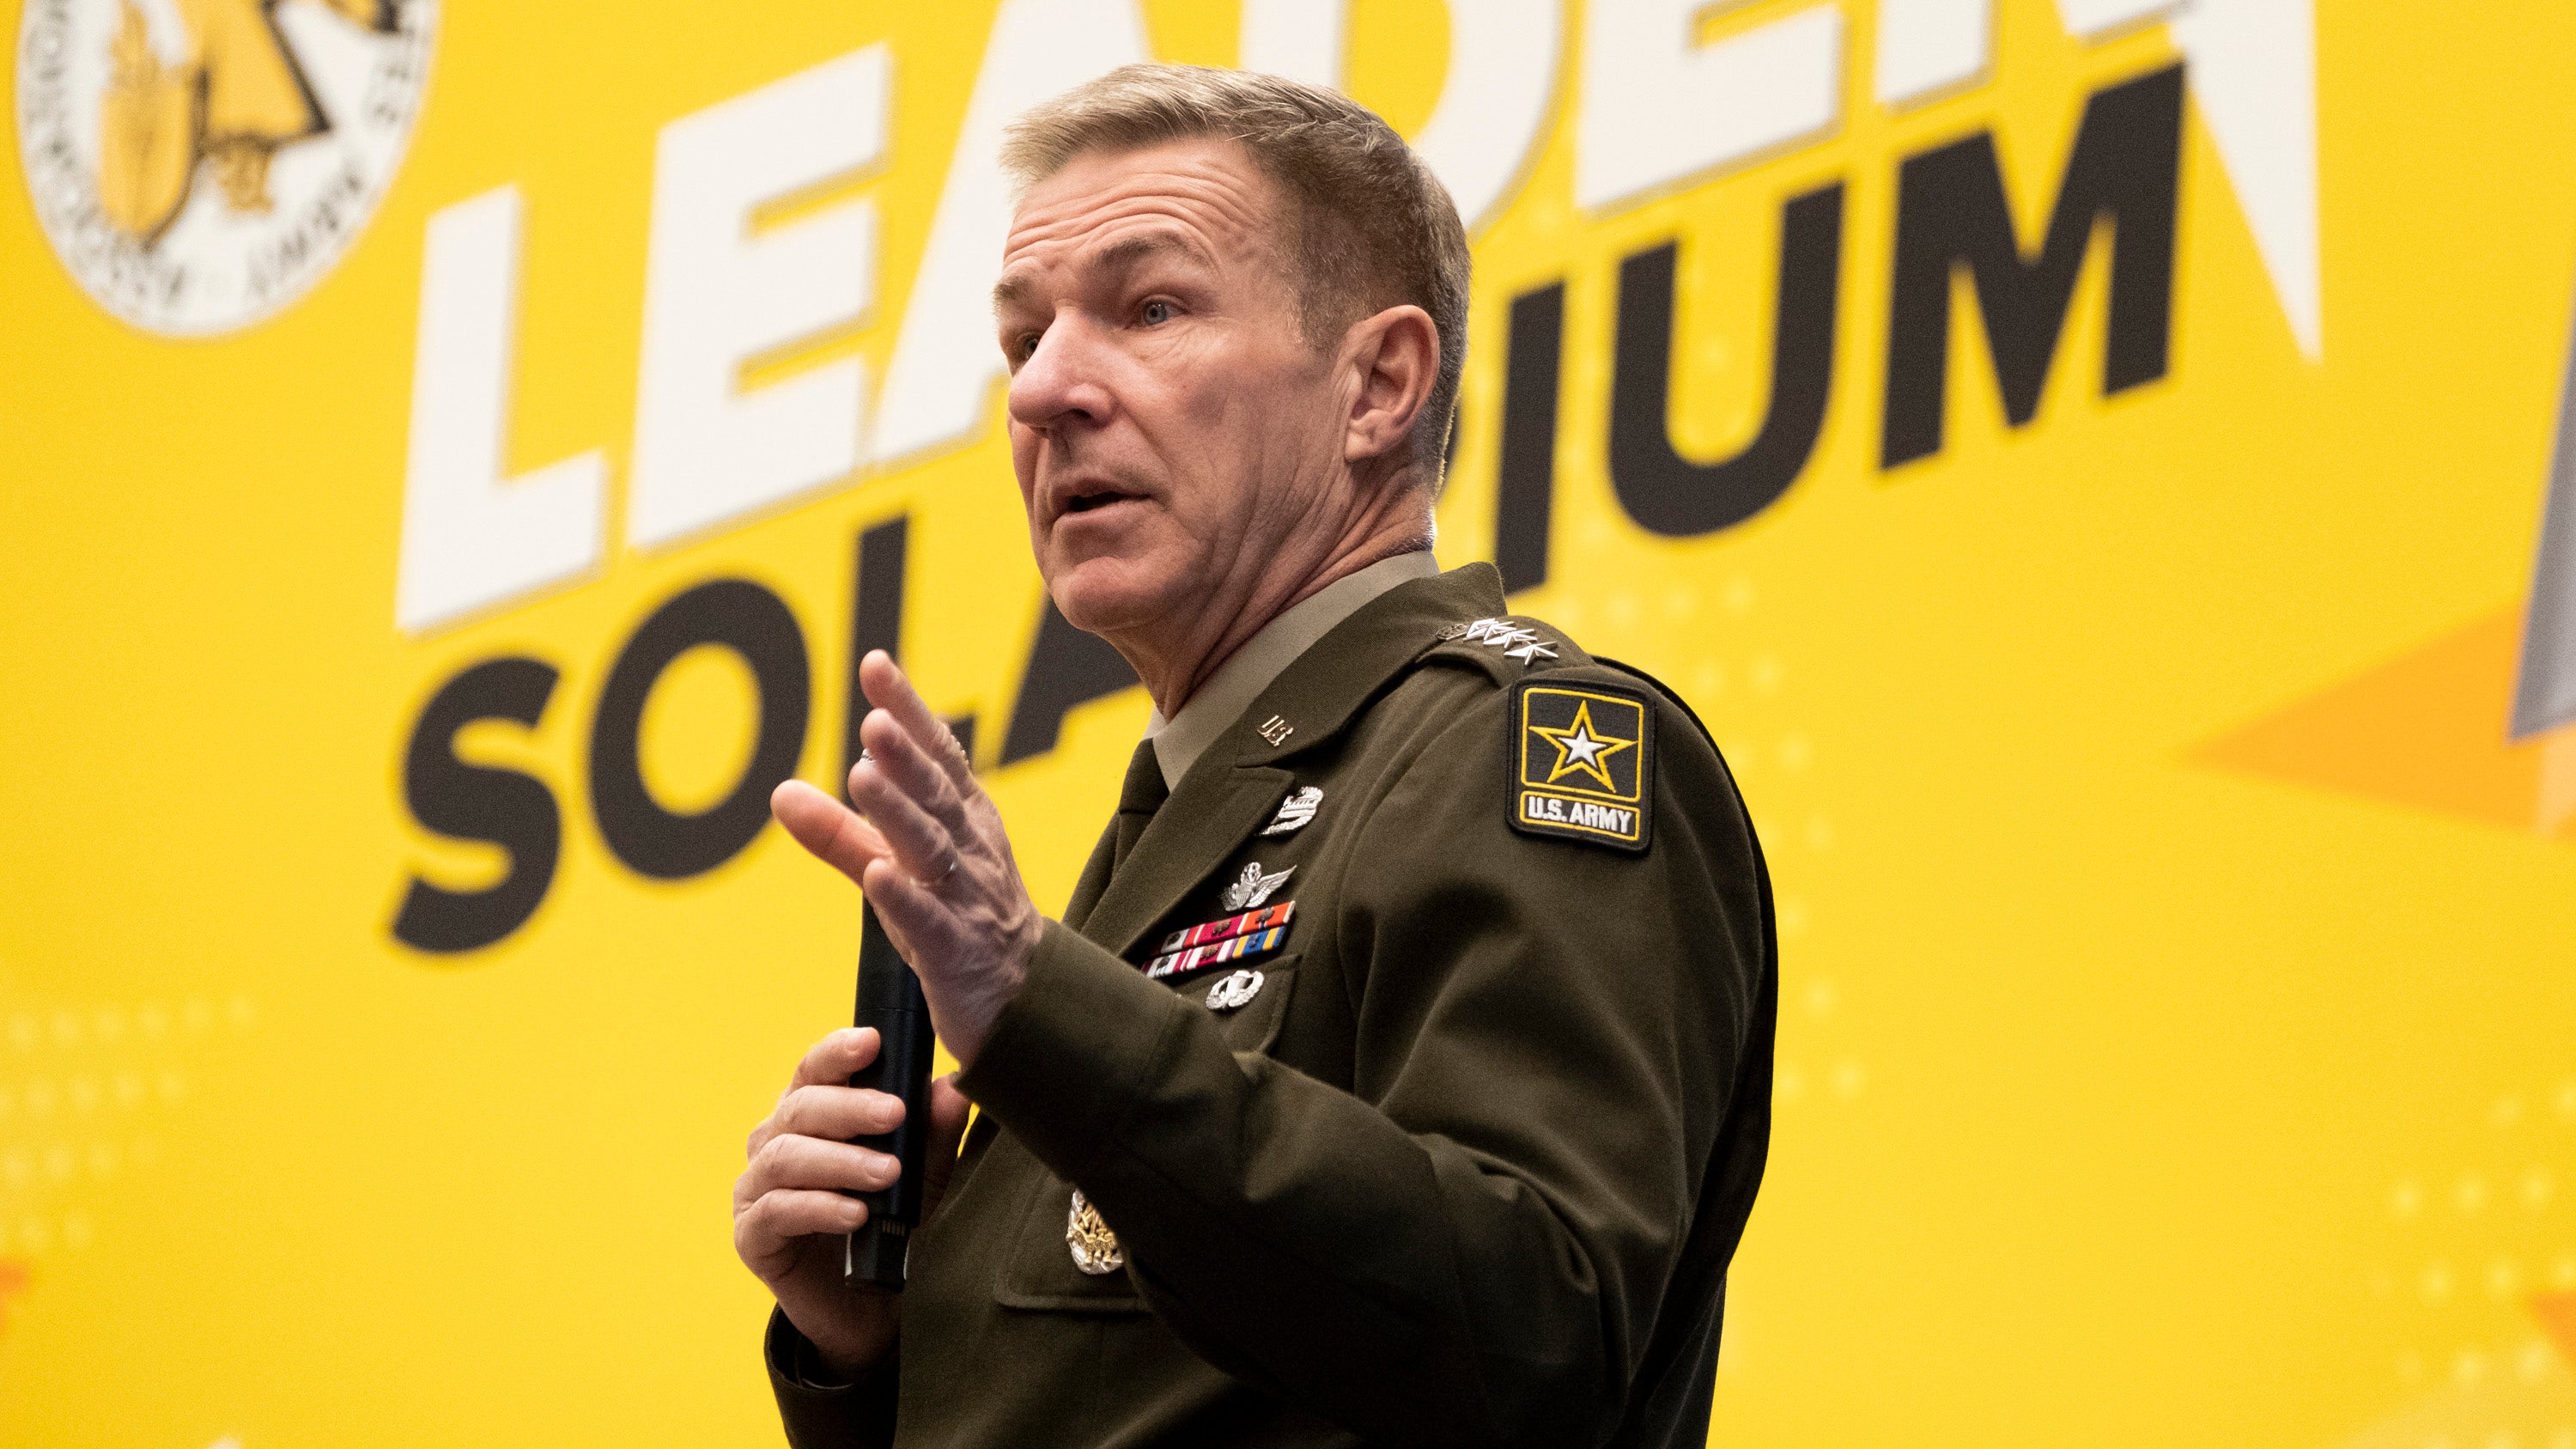 Chief of Staff of the Army Gen. James McConville speaks at the AUSA Solarium at the AUSA 2022 Annual Meeting in Washington, D.C., Monday, Oct. 10, 2022. (T.J. Kirkpatrick for AUSA)